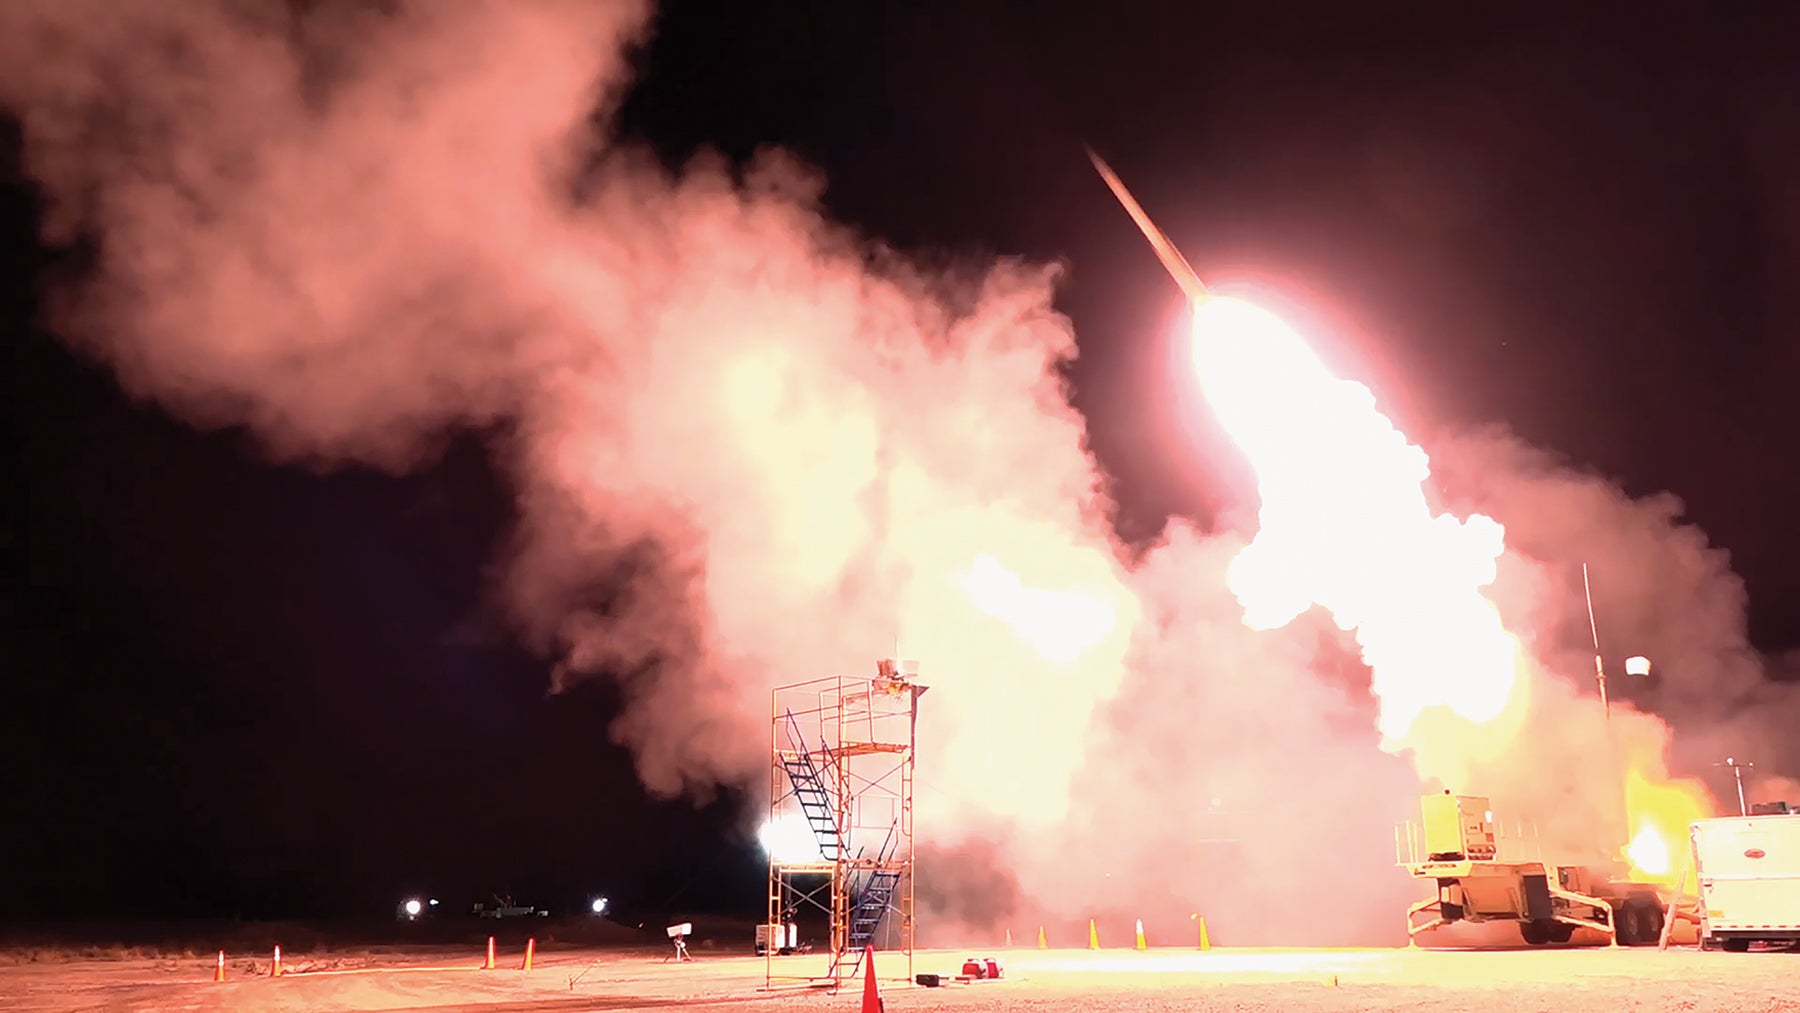 The Missile Defense Agency, in partnership with the U.S. Army Space and Missile Defense Command and other organizations, conducts a flight test of the Terminal High Altitude Area Defense weapon system at White Sands Missile Range, New Mexico. (Credit: DoD)